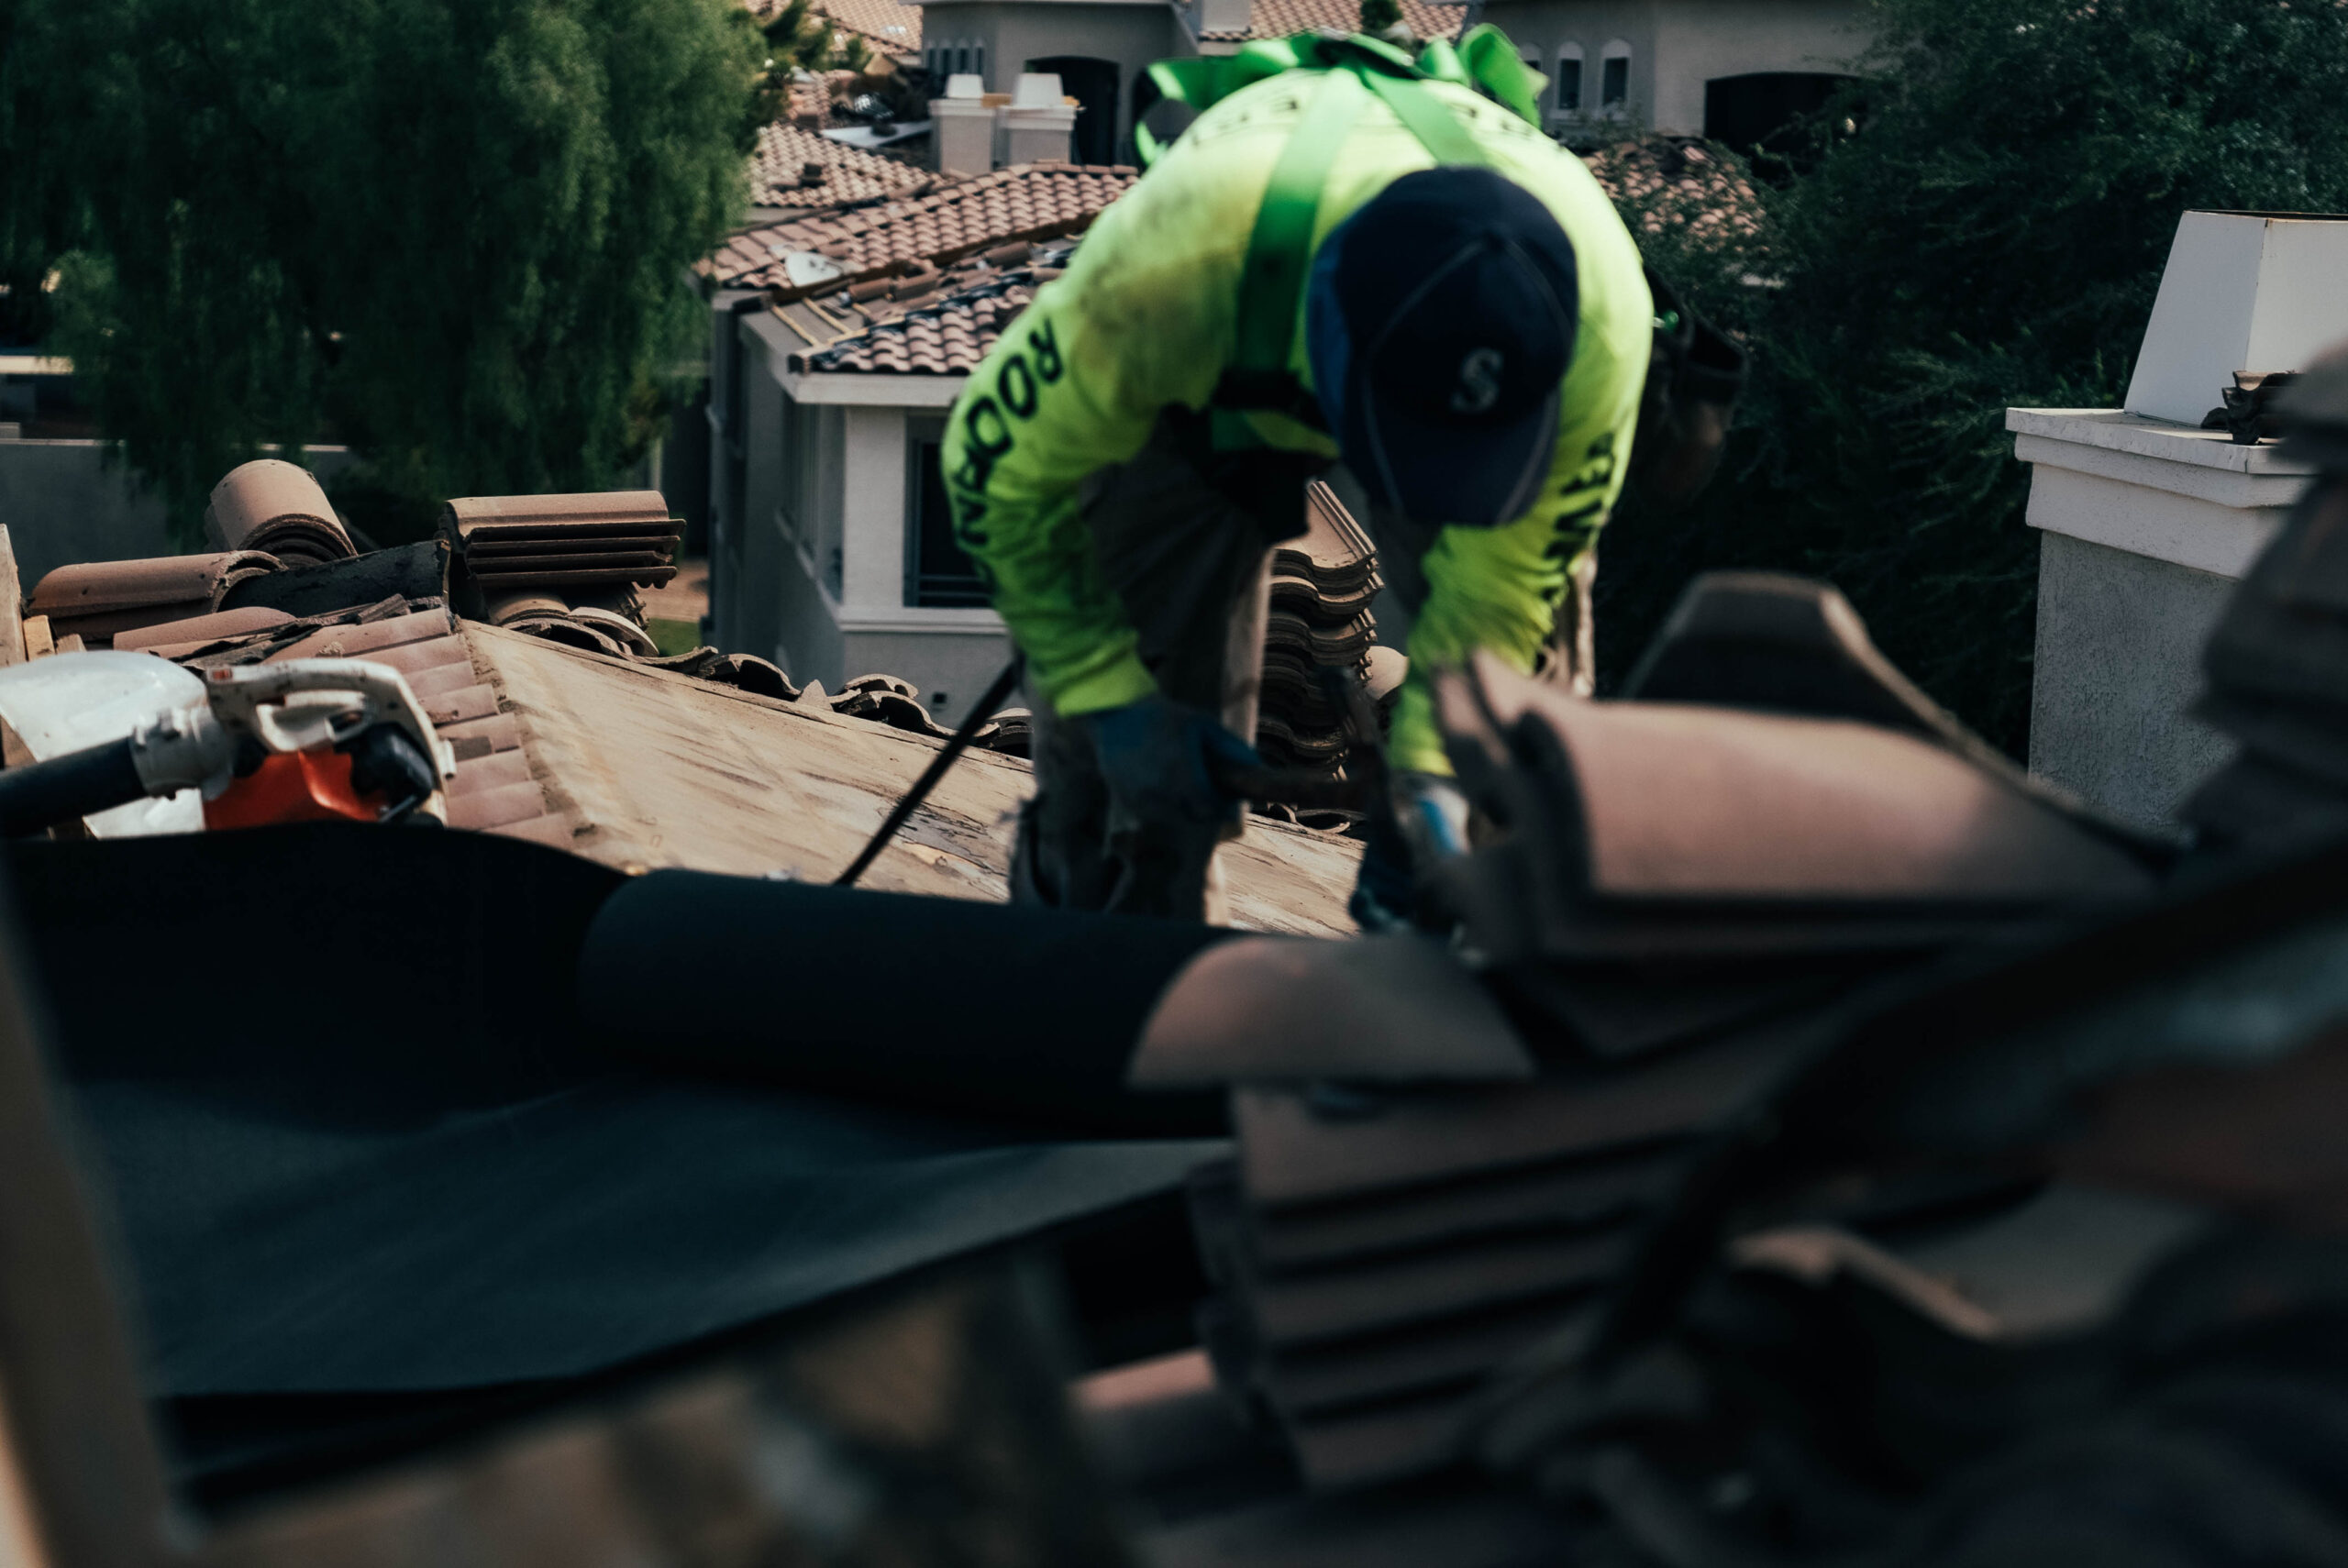 A man is installing a Phoenix tile roof in a residential area.